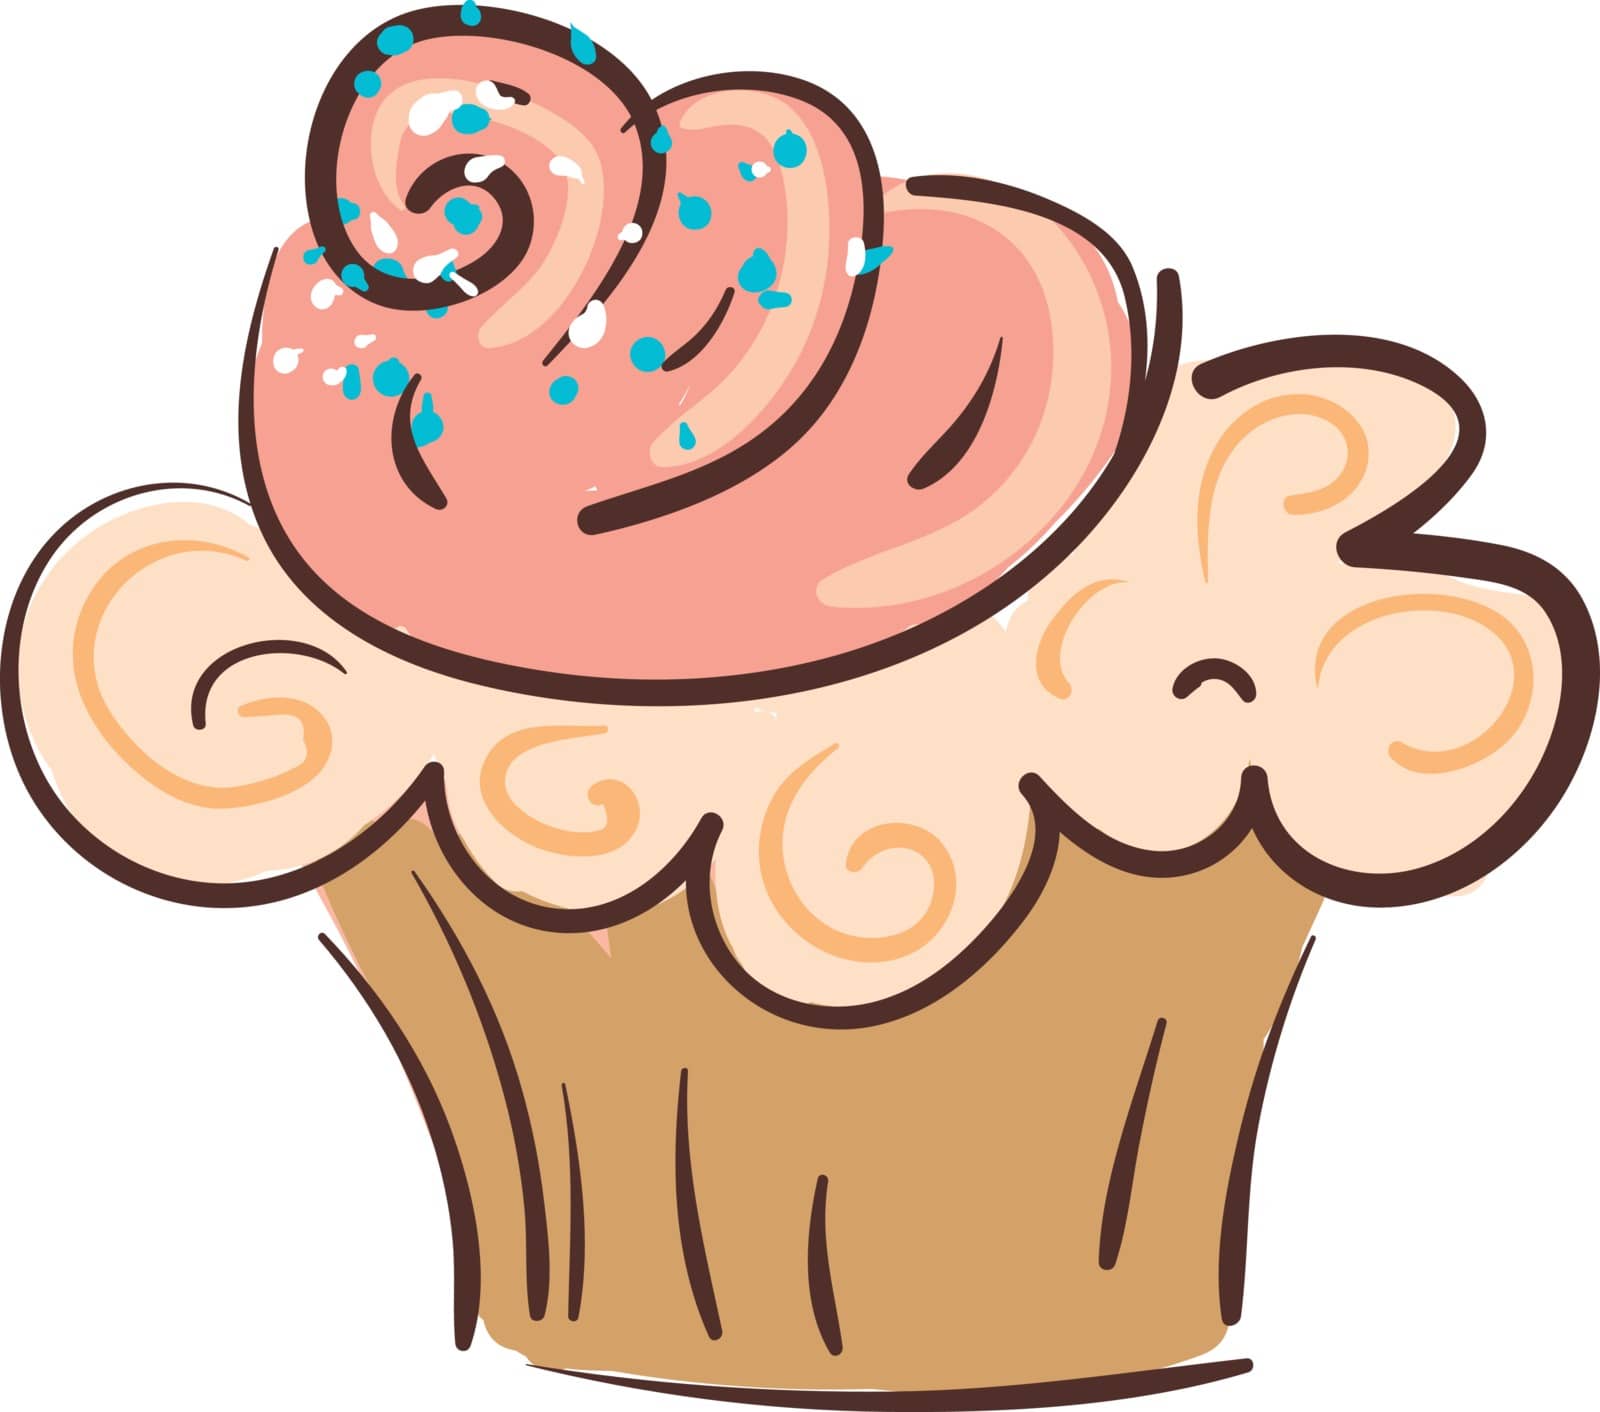 An attractive brown cupcake with pink frosting and blue sprinkles kept on a table vector color drawing or illustration 